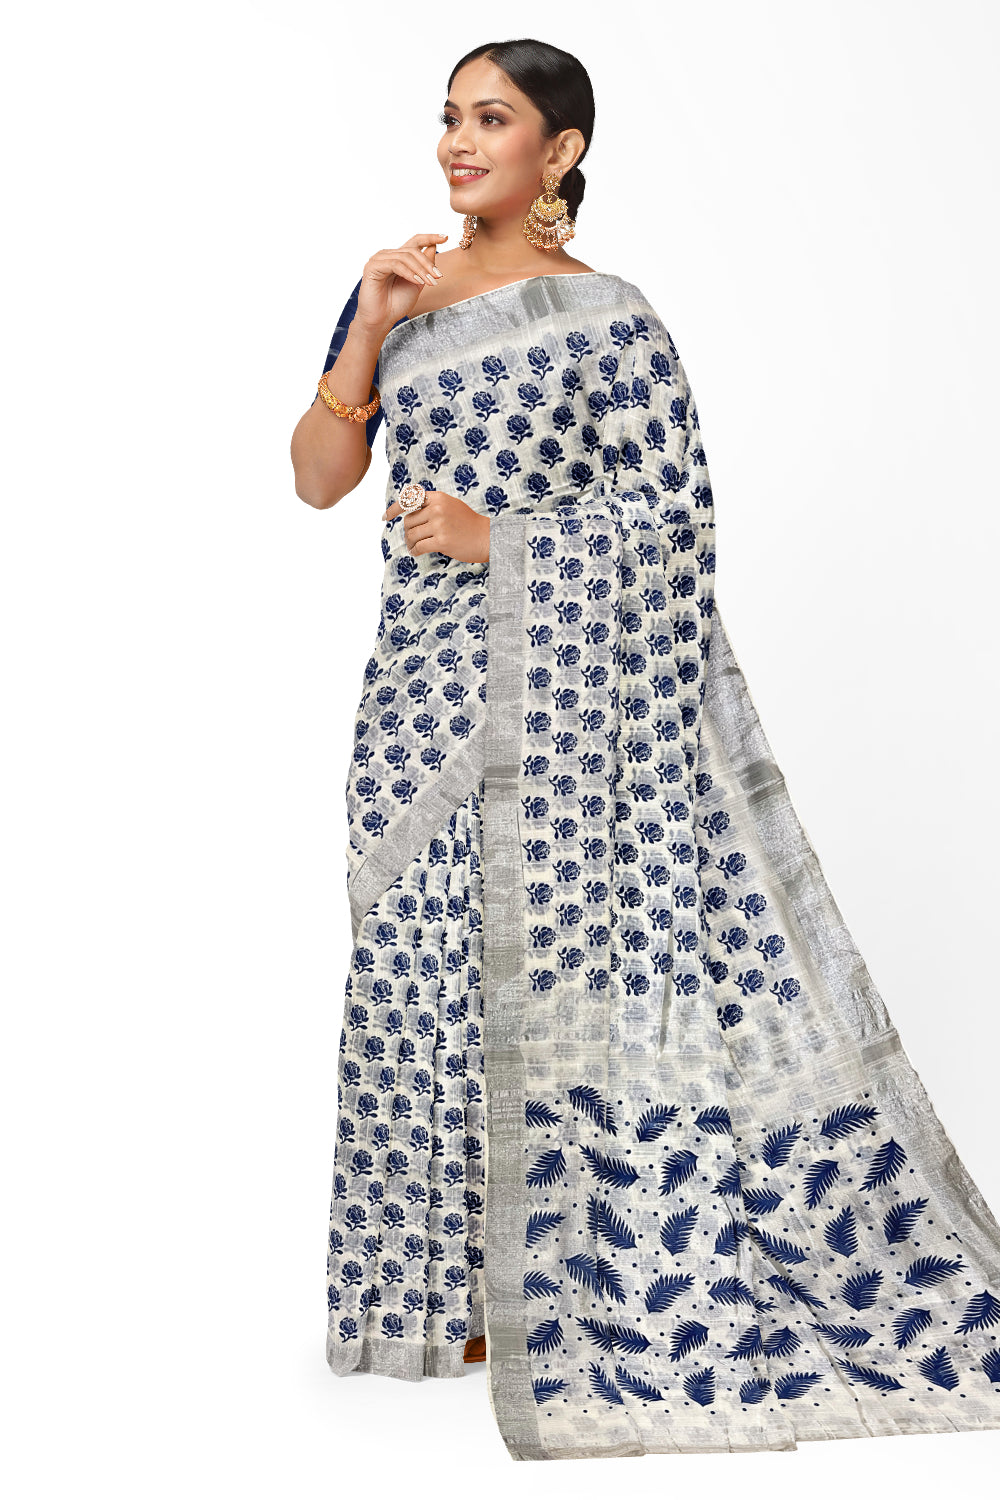 Southloom Linen White Saree with Blue Floral Prints and Tassels works on Pallu